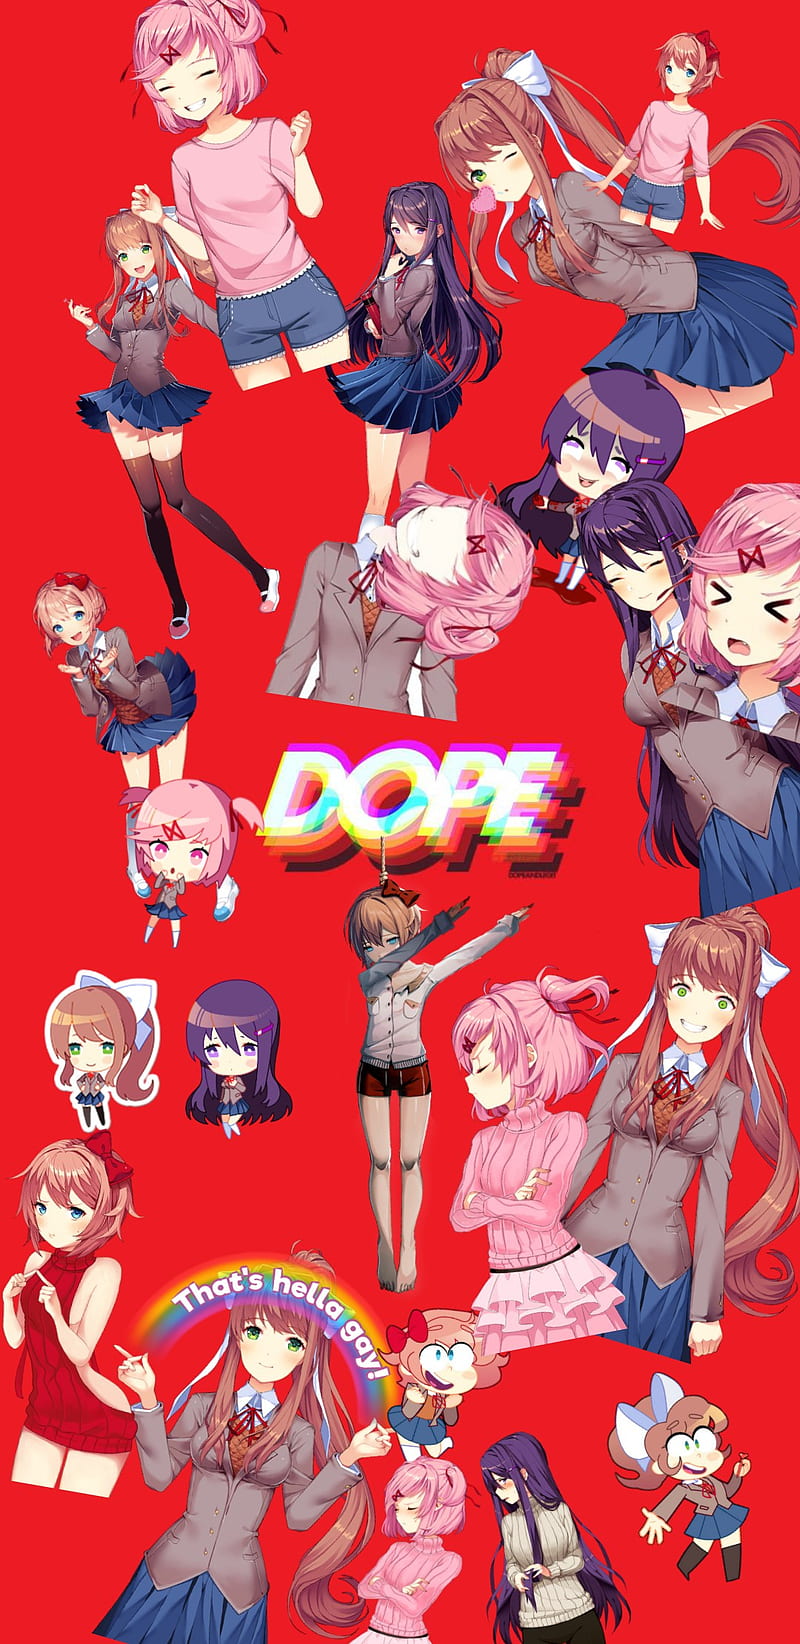 Made a new phone wallpaper for anyone who wants it  rDDLC